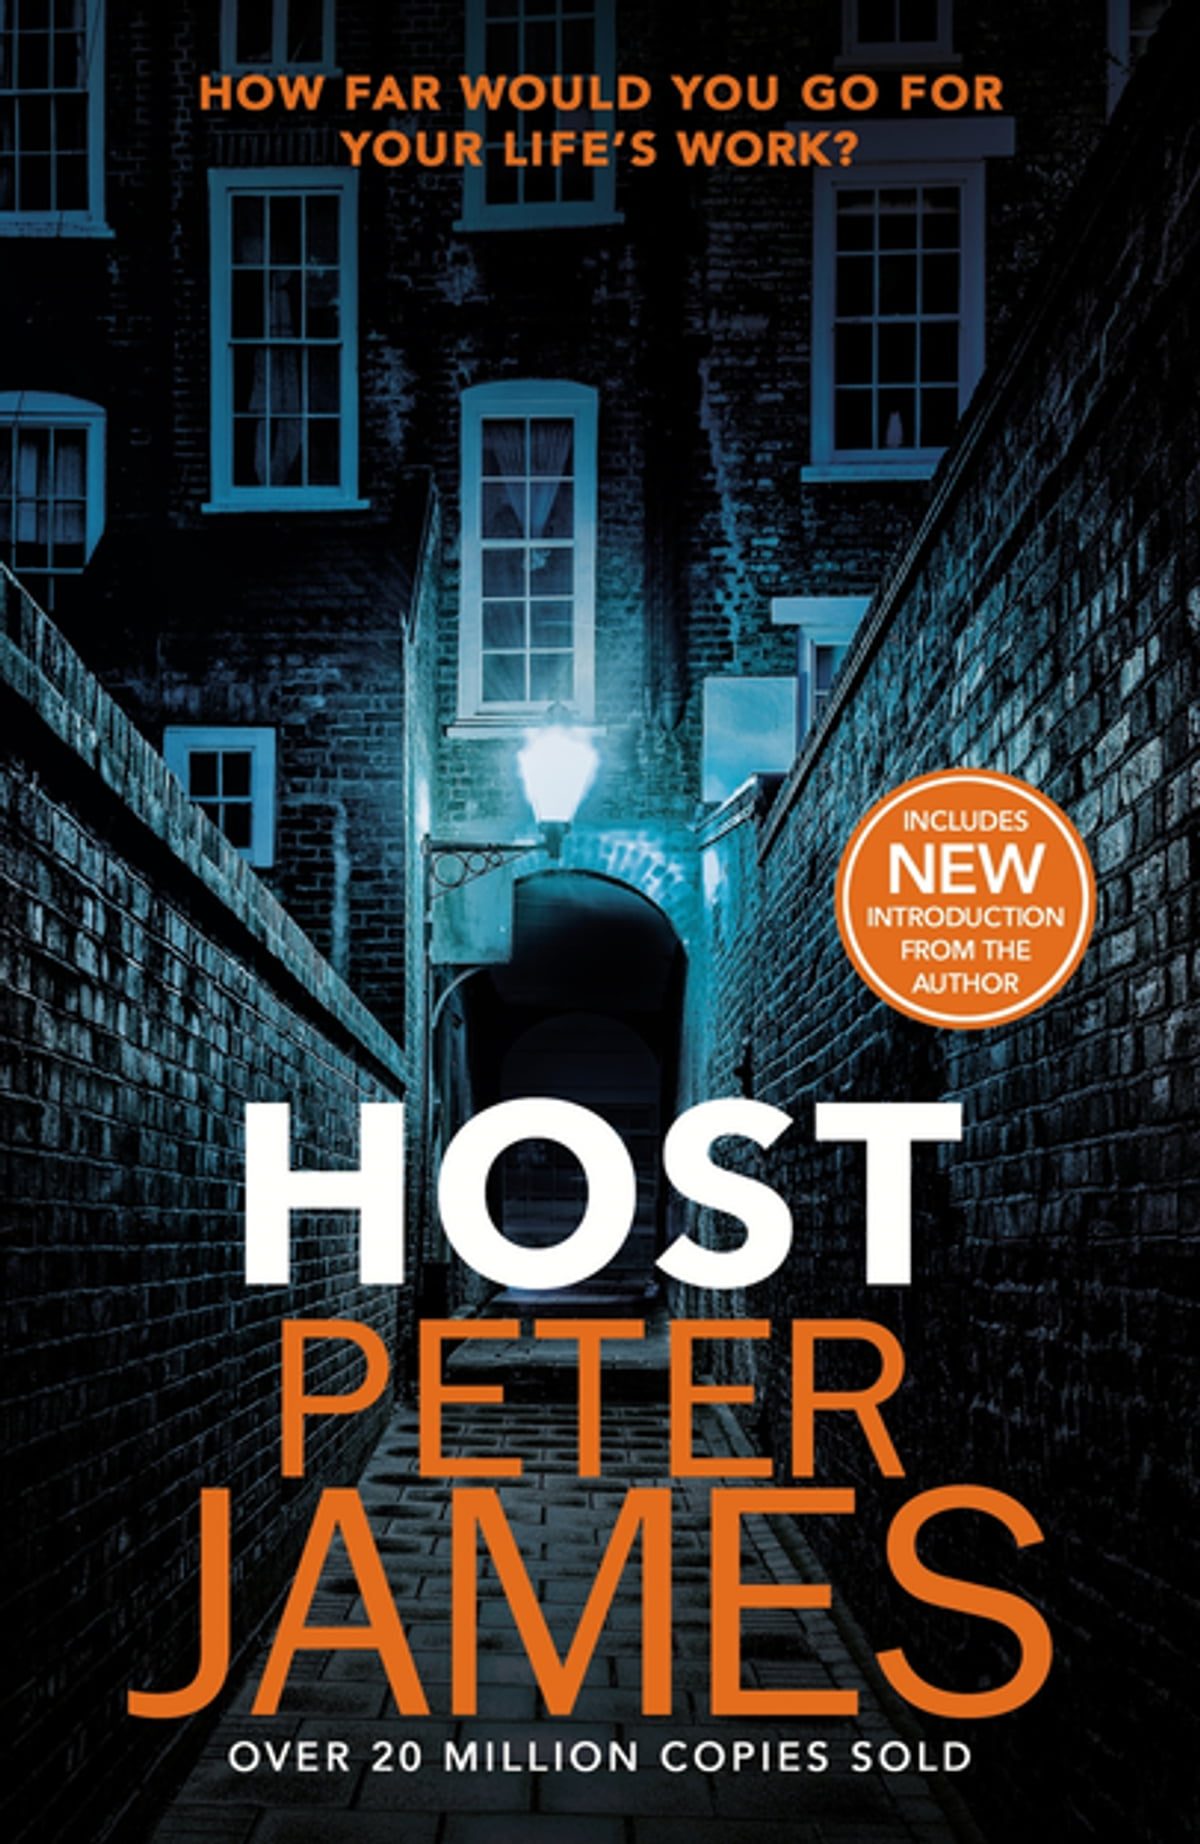 Peter James Books in Order Guide 36+ Books]